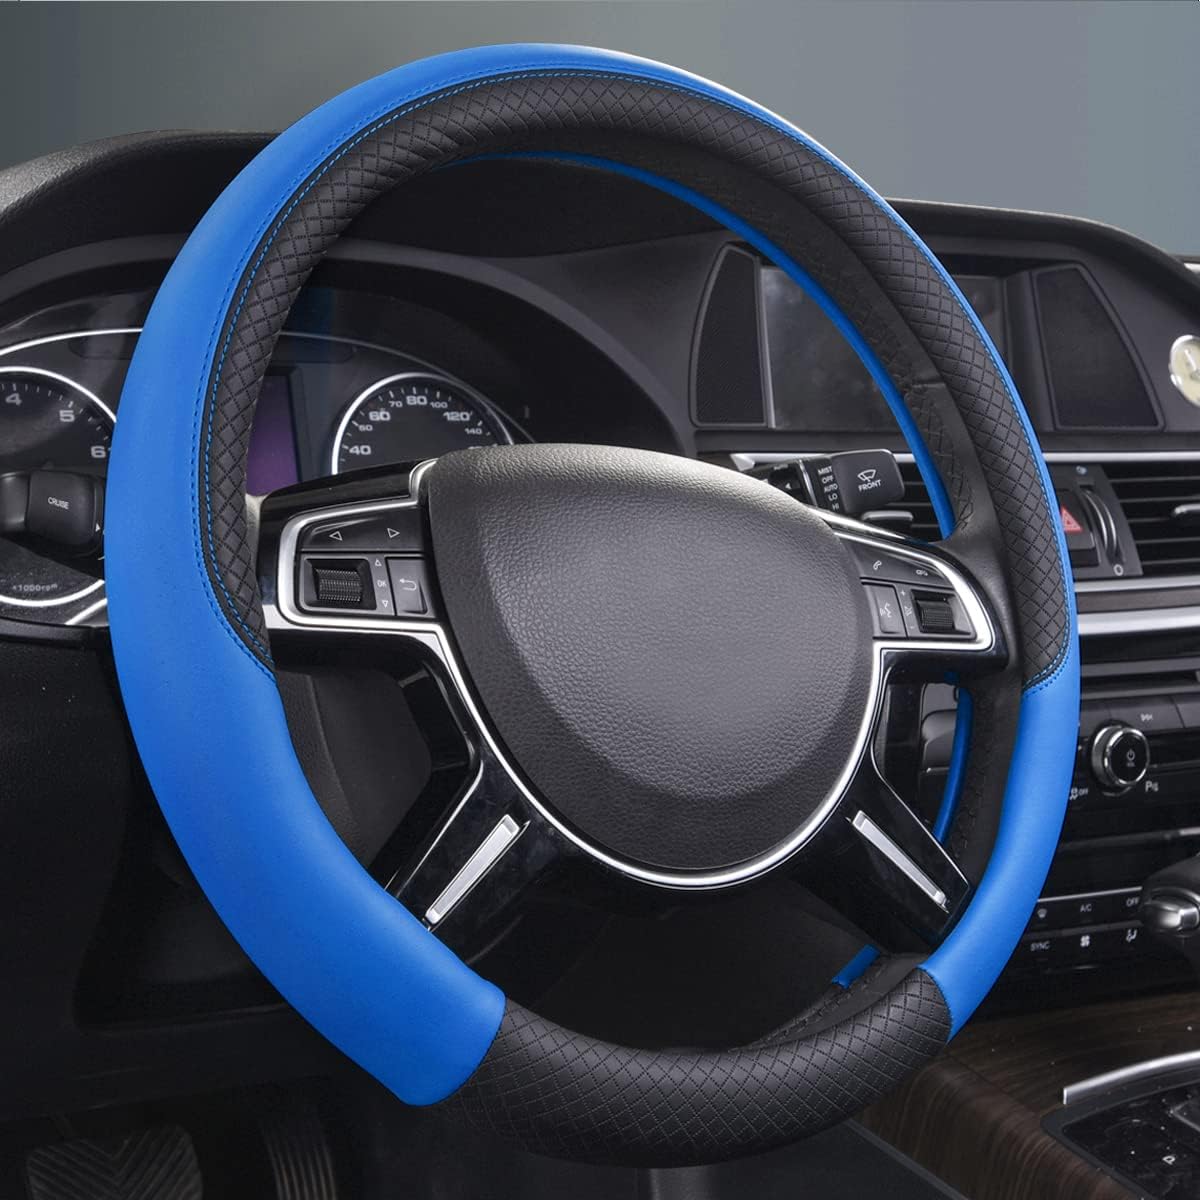 CAR PASS Line Rider Microfiber Leather Sporty Steering Wheel Cover Universal Fits for 95% Truck,SUV,Cars,14.5-15inch Anti-Slip Safety Comfortable Desgin (Black-Blue)